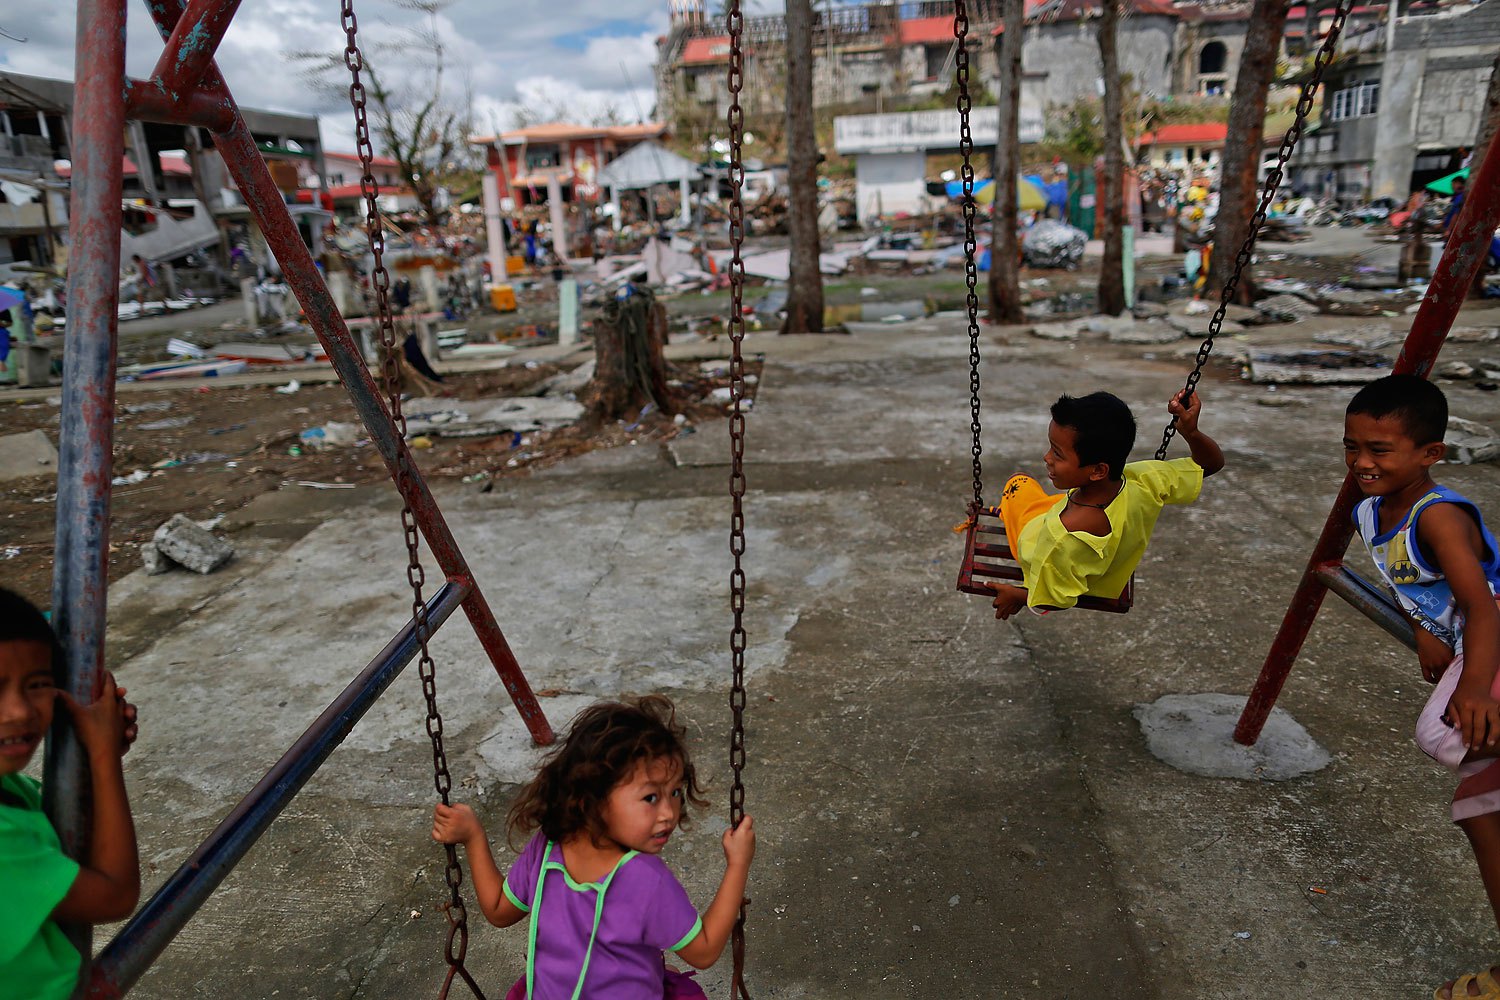 Children, survivors of Typhoon Haiyan, play on swings at a devastated area of Basey, north of Tacloban, November 19, 2013.